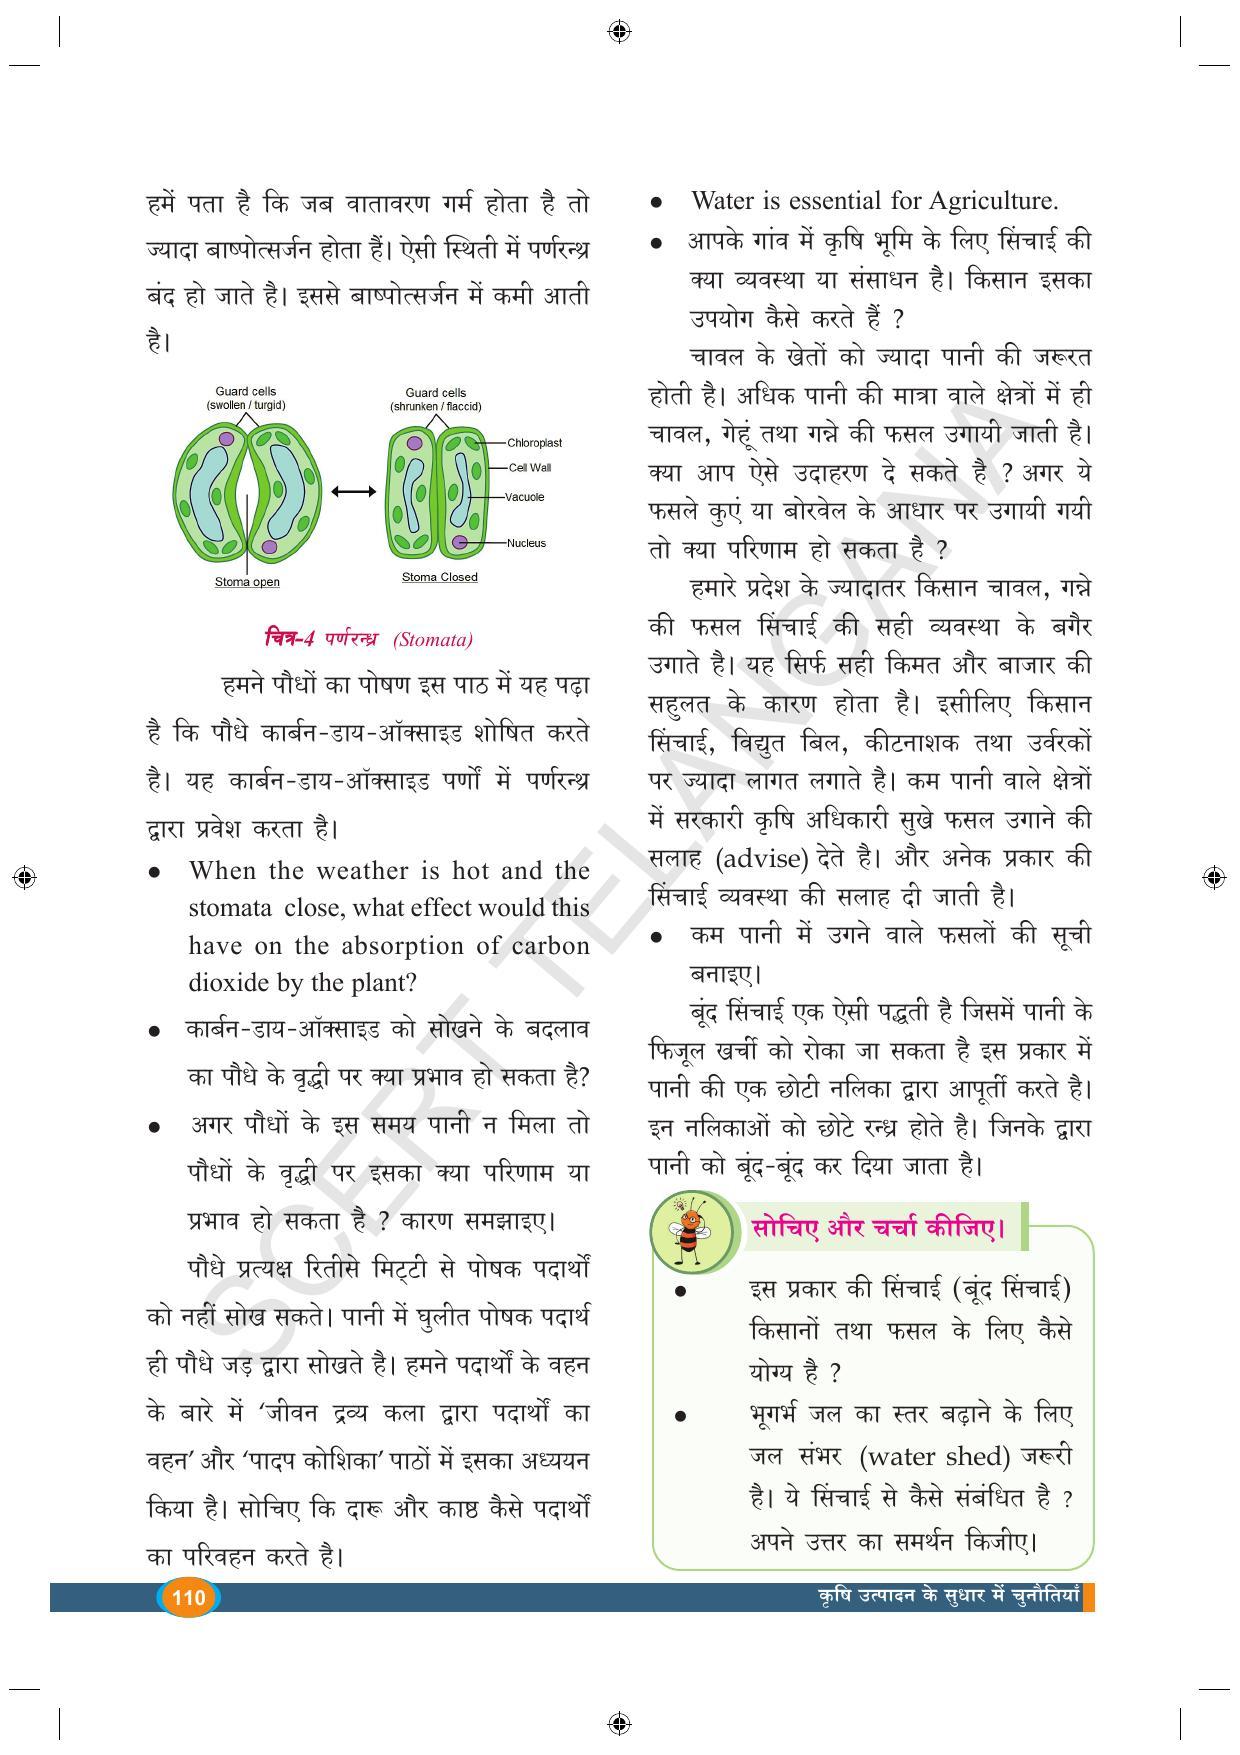 TS SCERT Class 9 Biological Science (Hindi Medium) Text Book - Page 122